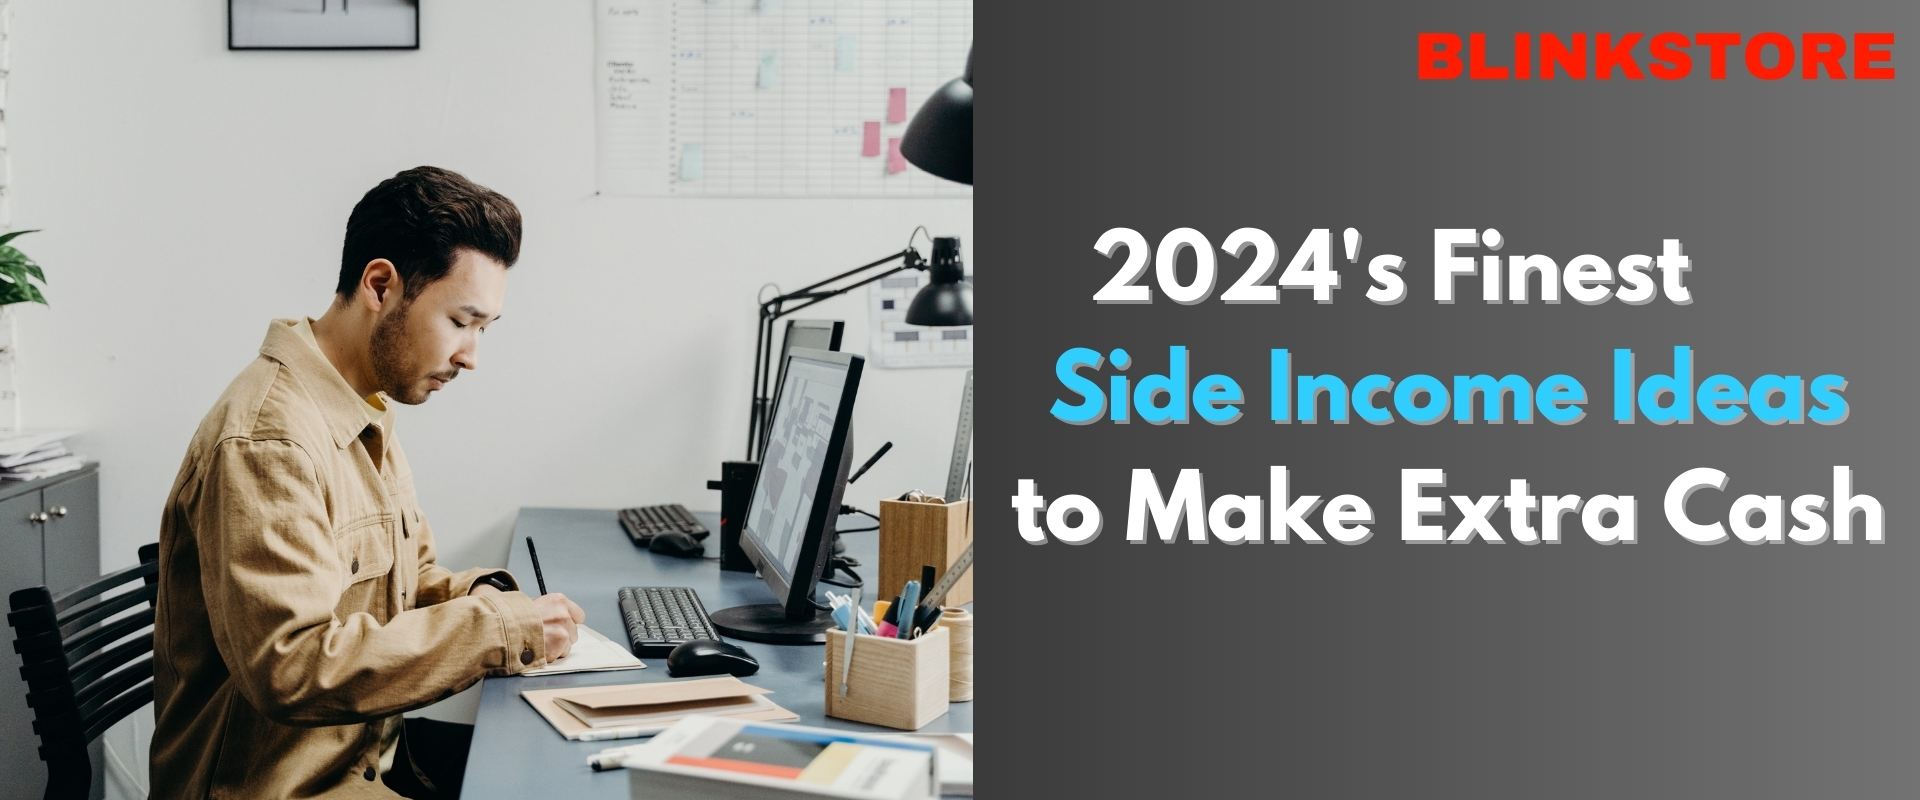 2024’s Finest Side Income Ideas to Make Extra Cash